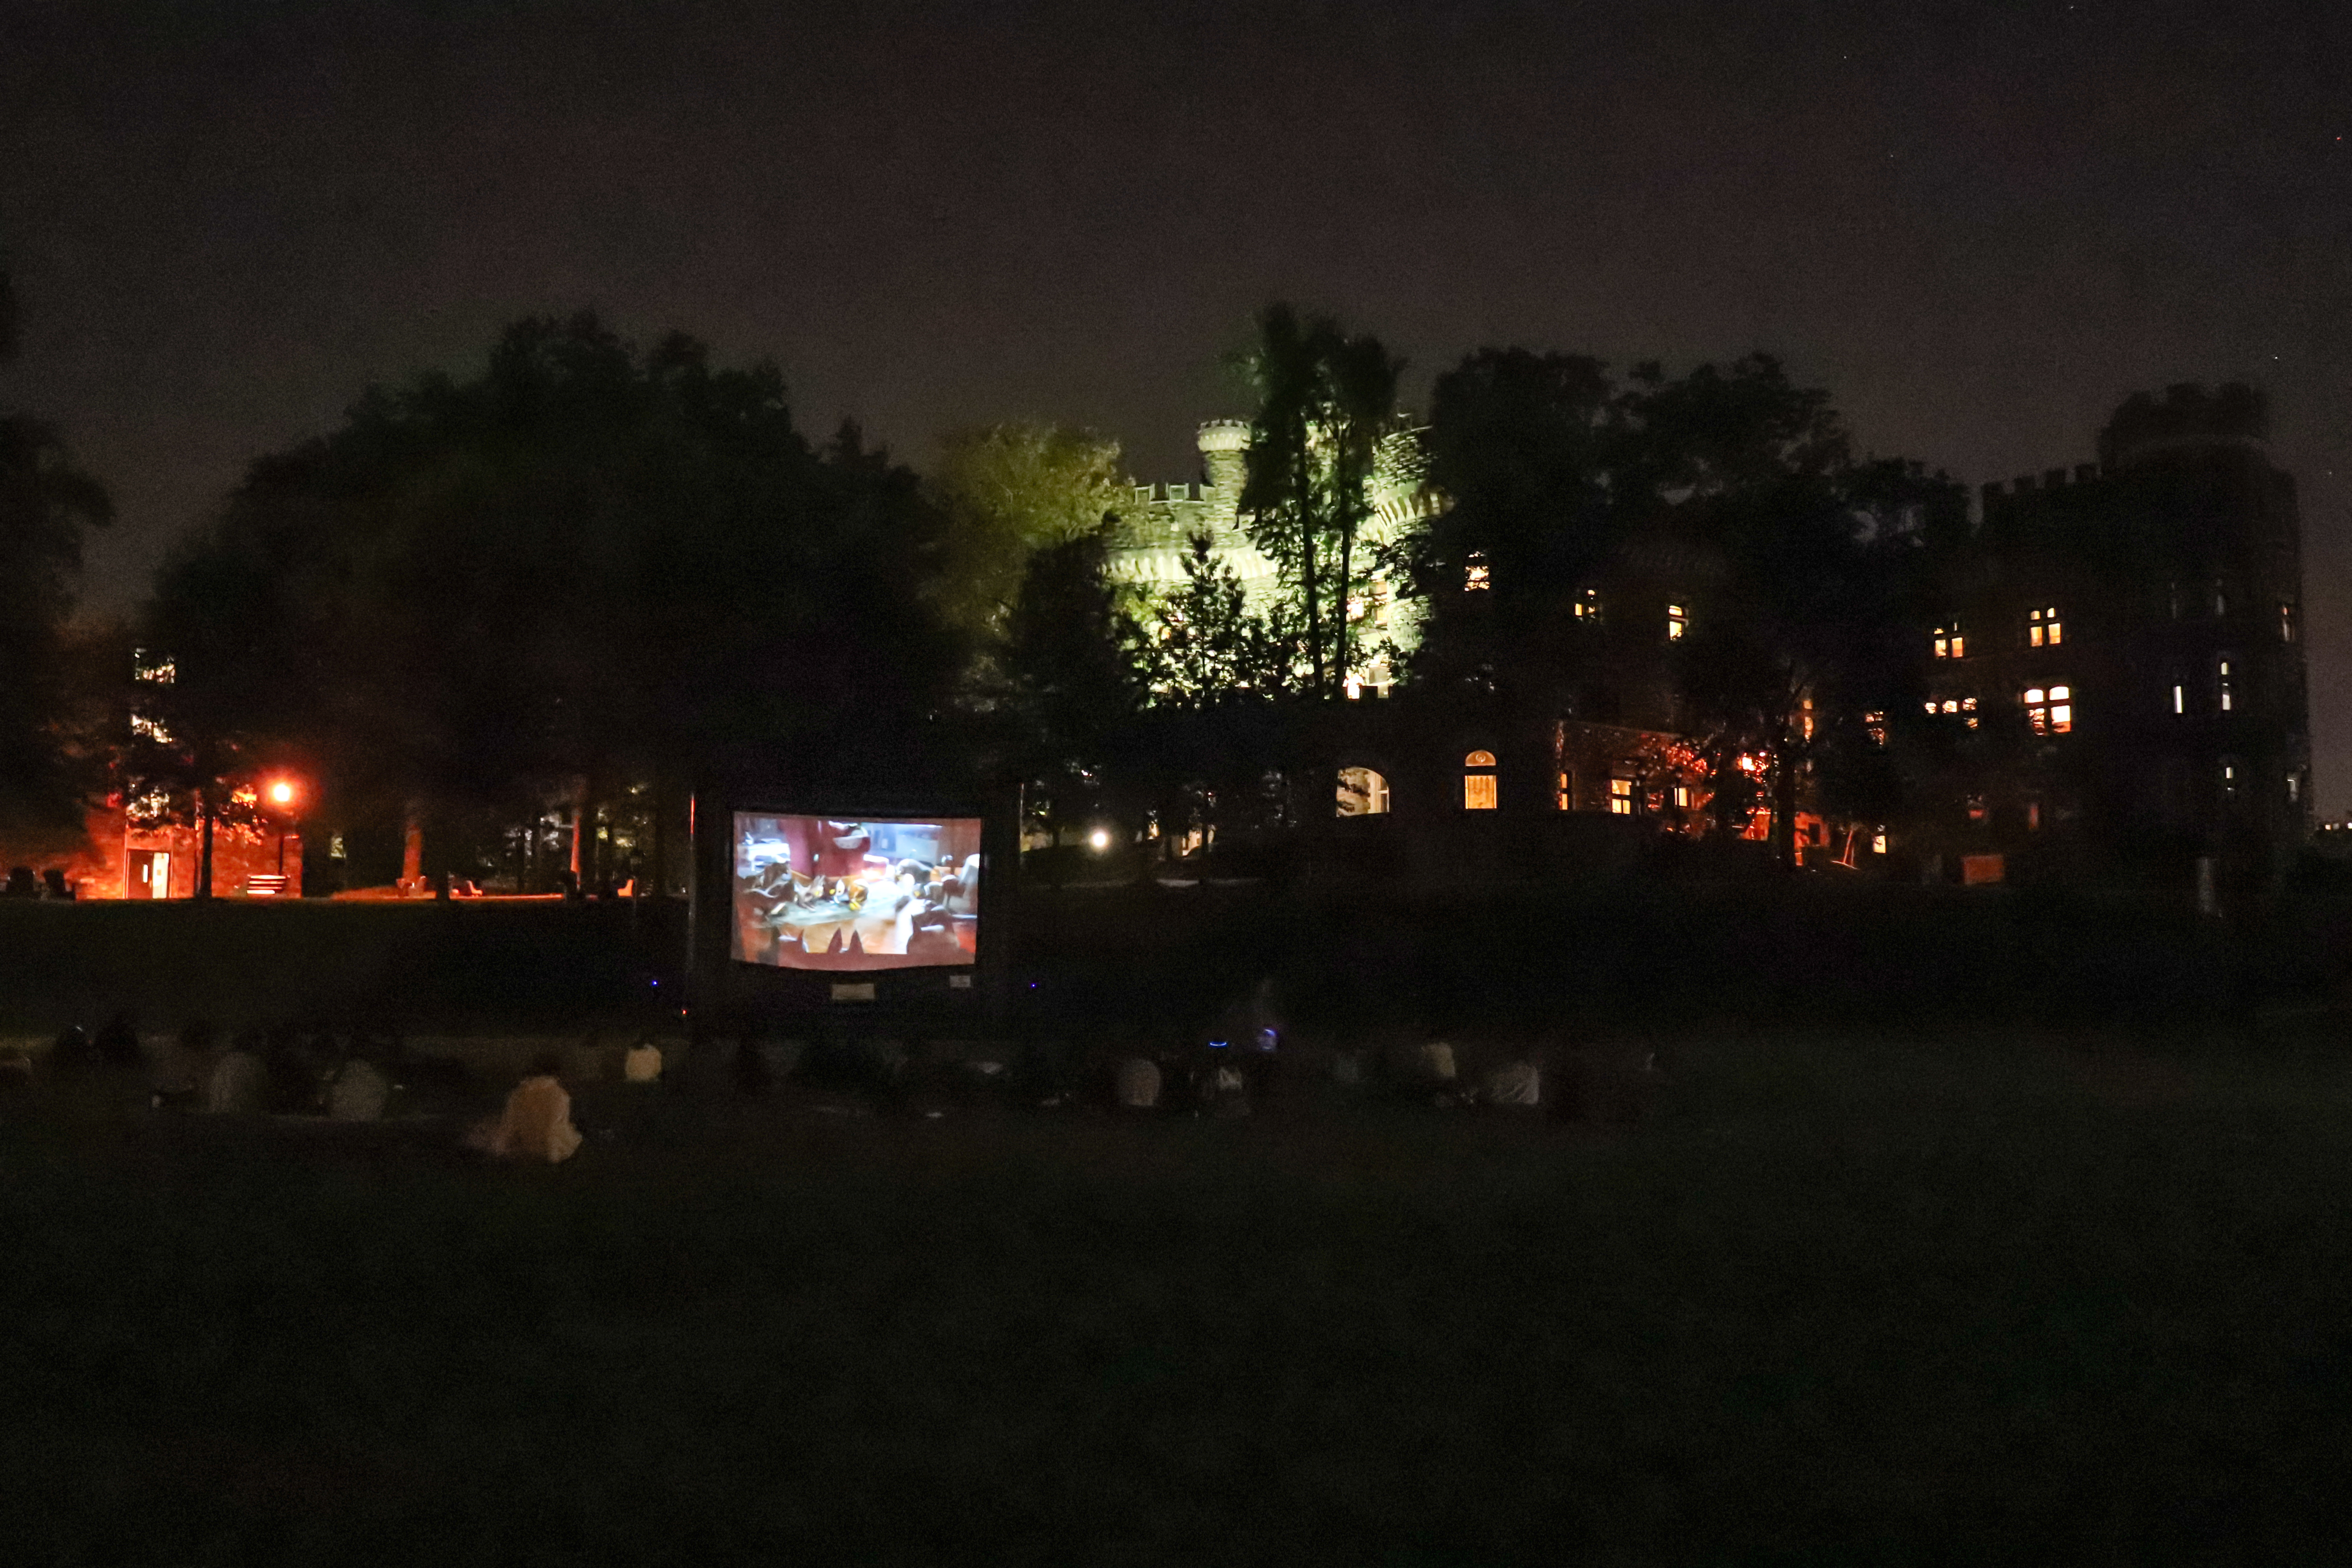 Students watching a film on a projected screen outside under the stars.